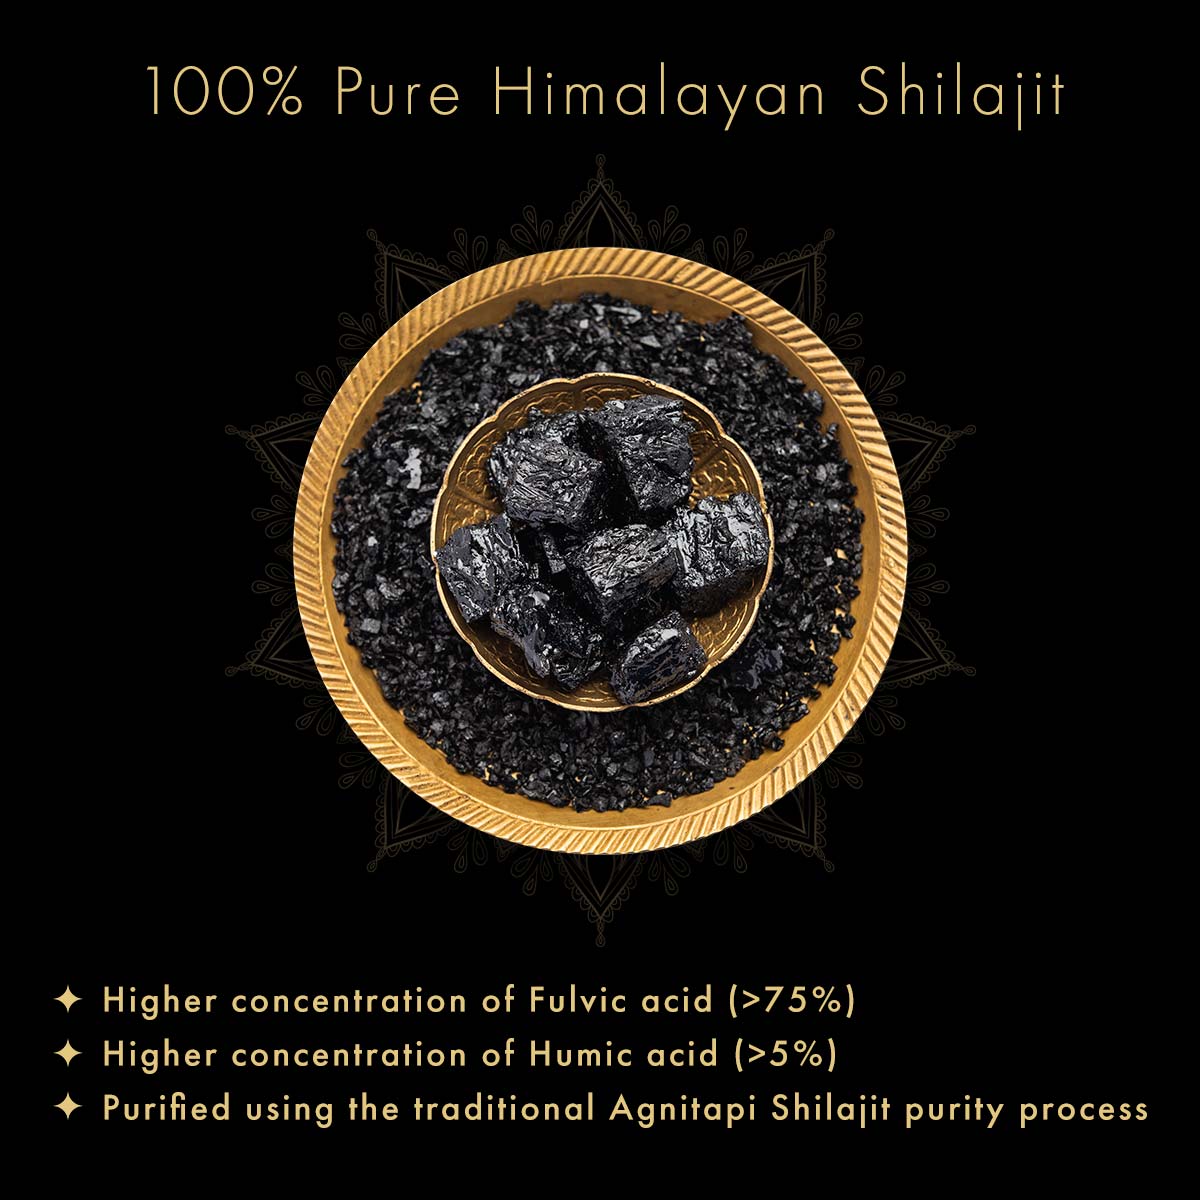 H24T ShilajitResin: Made From 100% Pure Himalayan Shilajit To Help Boost Stamina, Strength & Energy